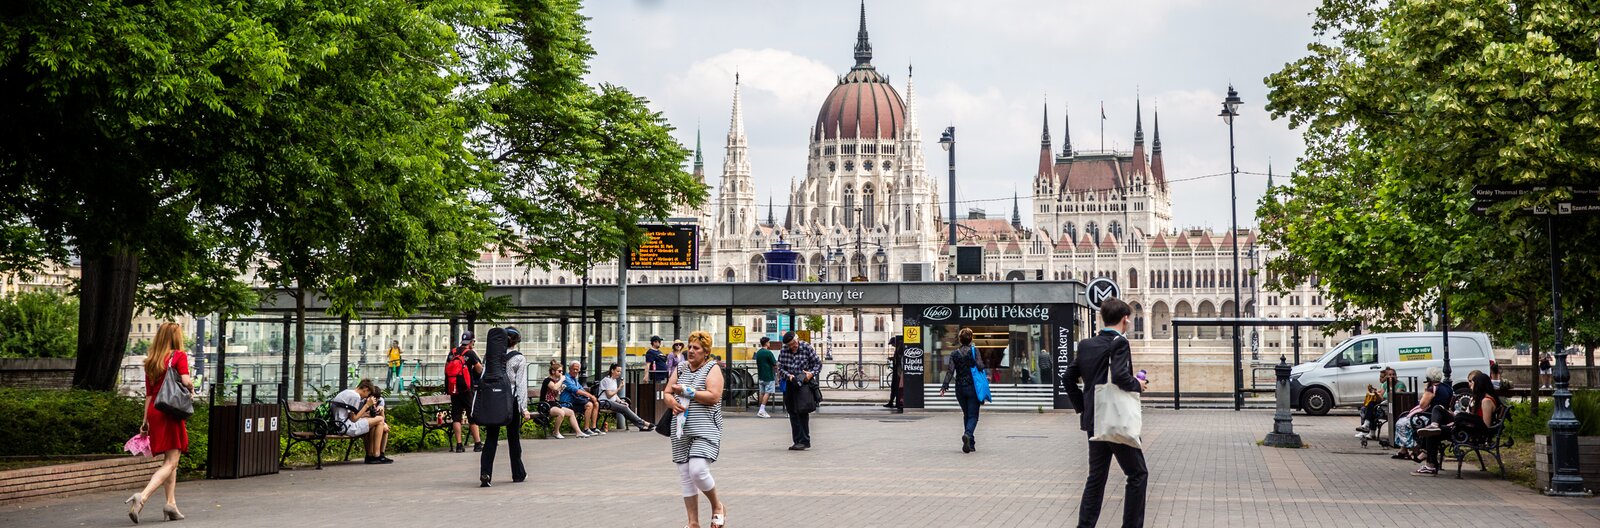 The Hungarian Parliament Building in all its glory, as seen from Batthyány tér.